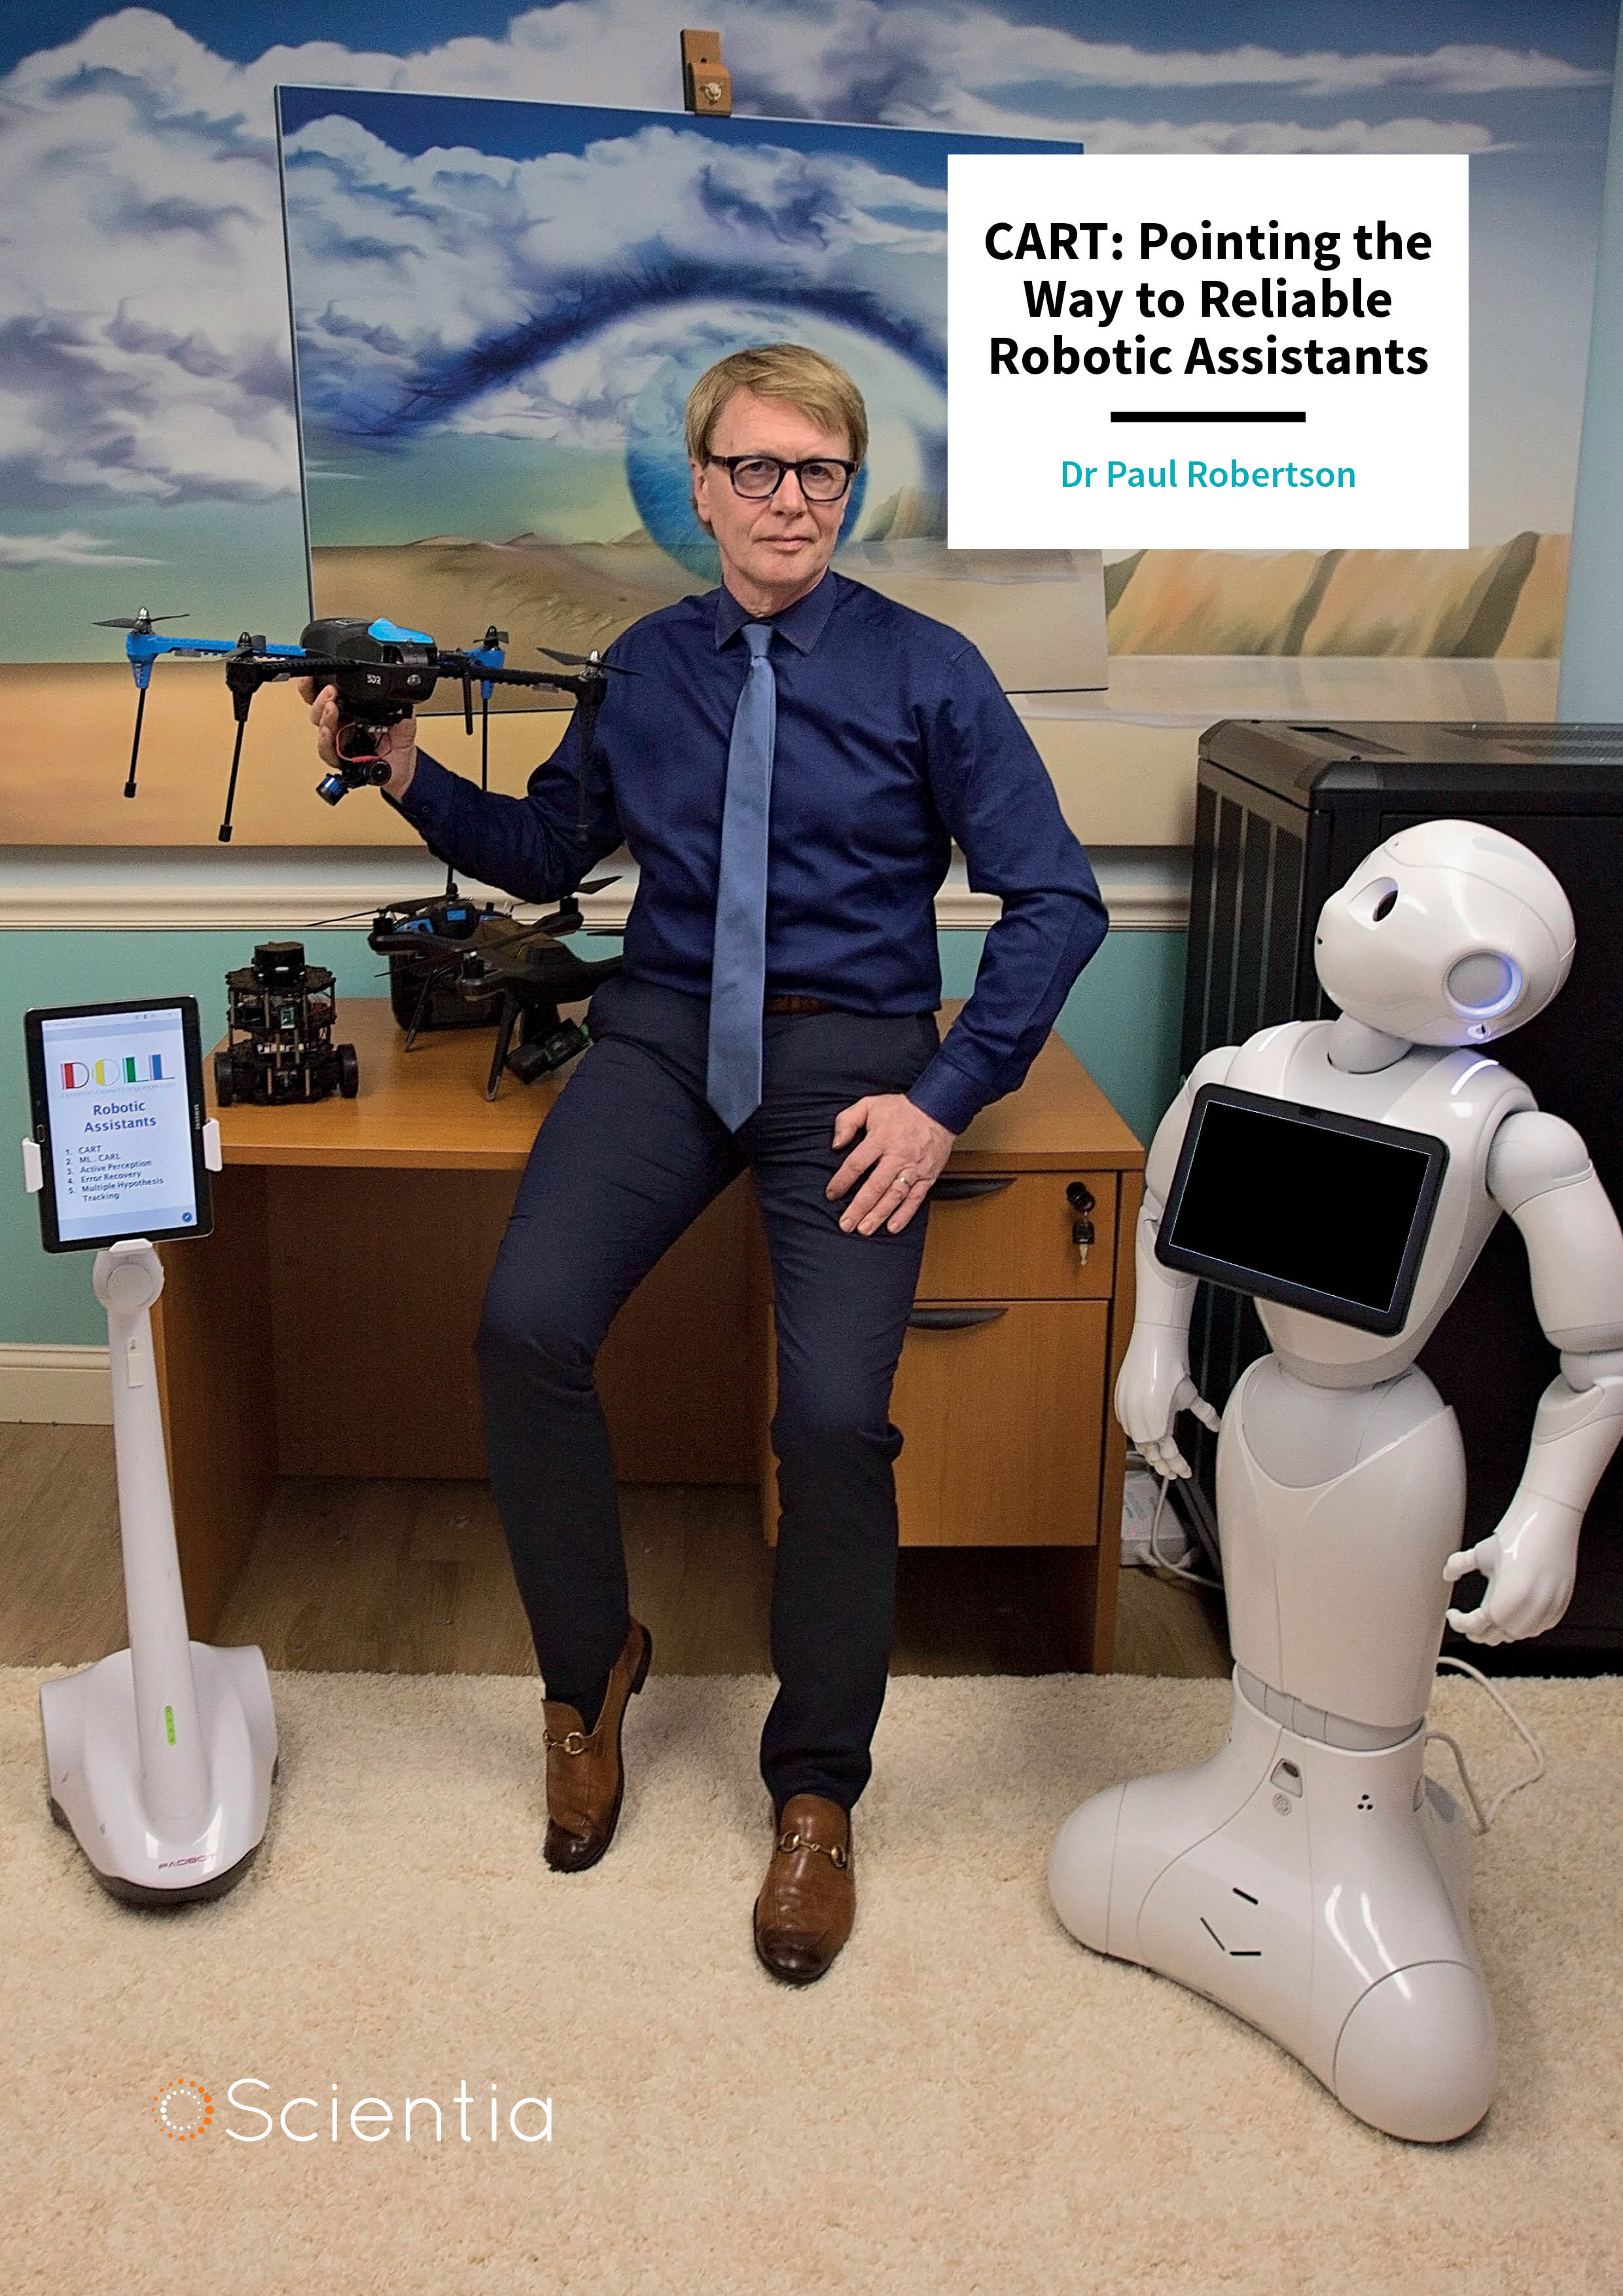 Dr Paul Robertson – CART: Pointing the Way to Reliable Robotic Assistants